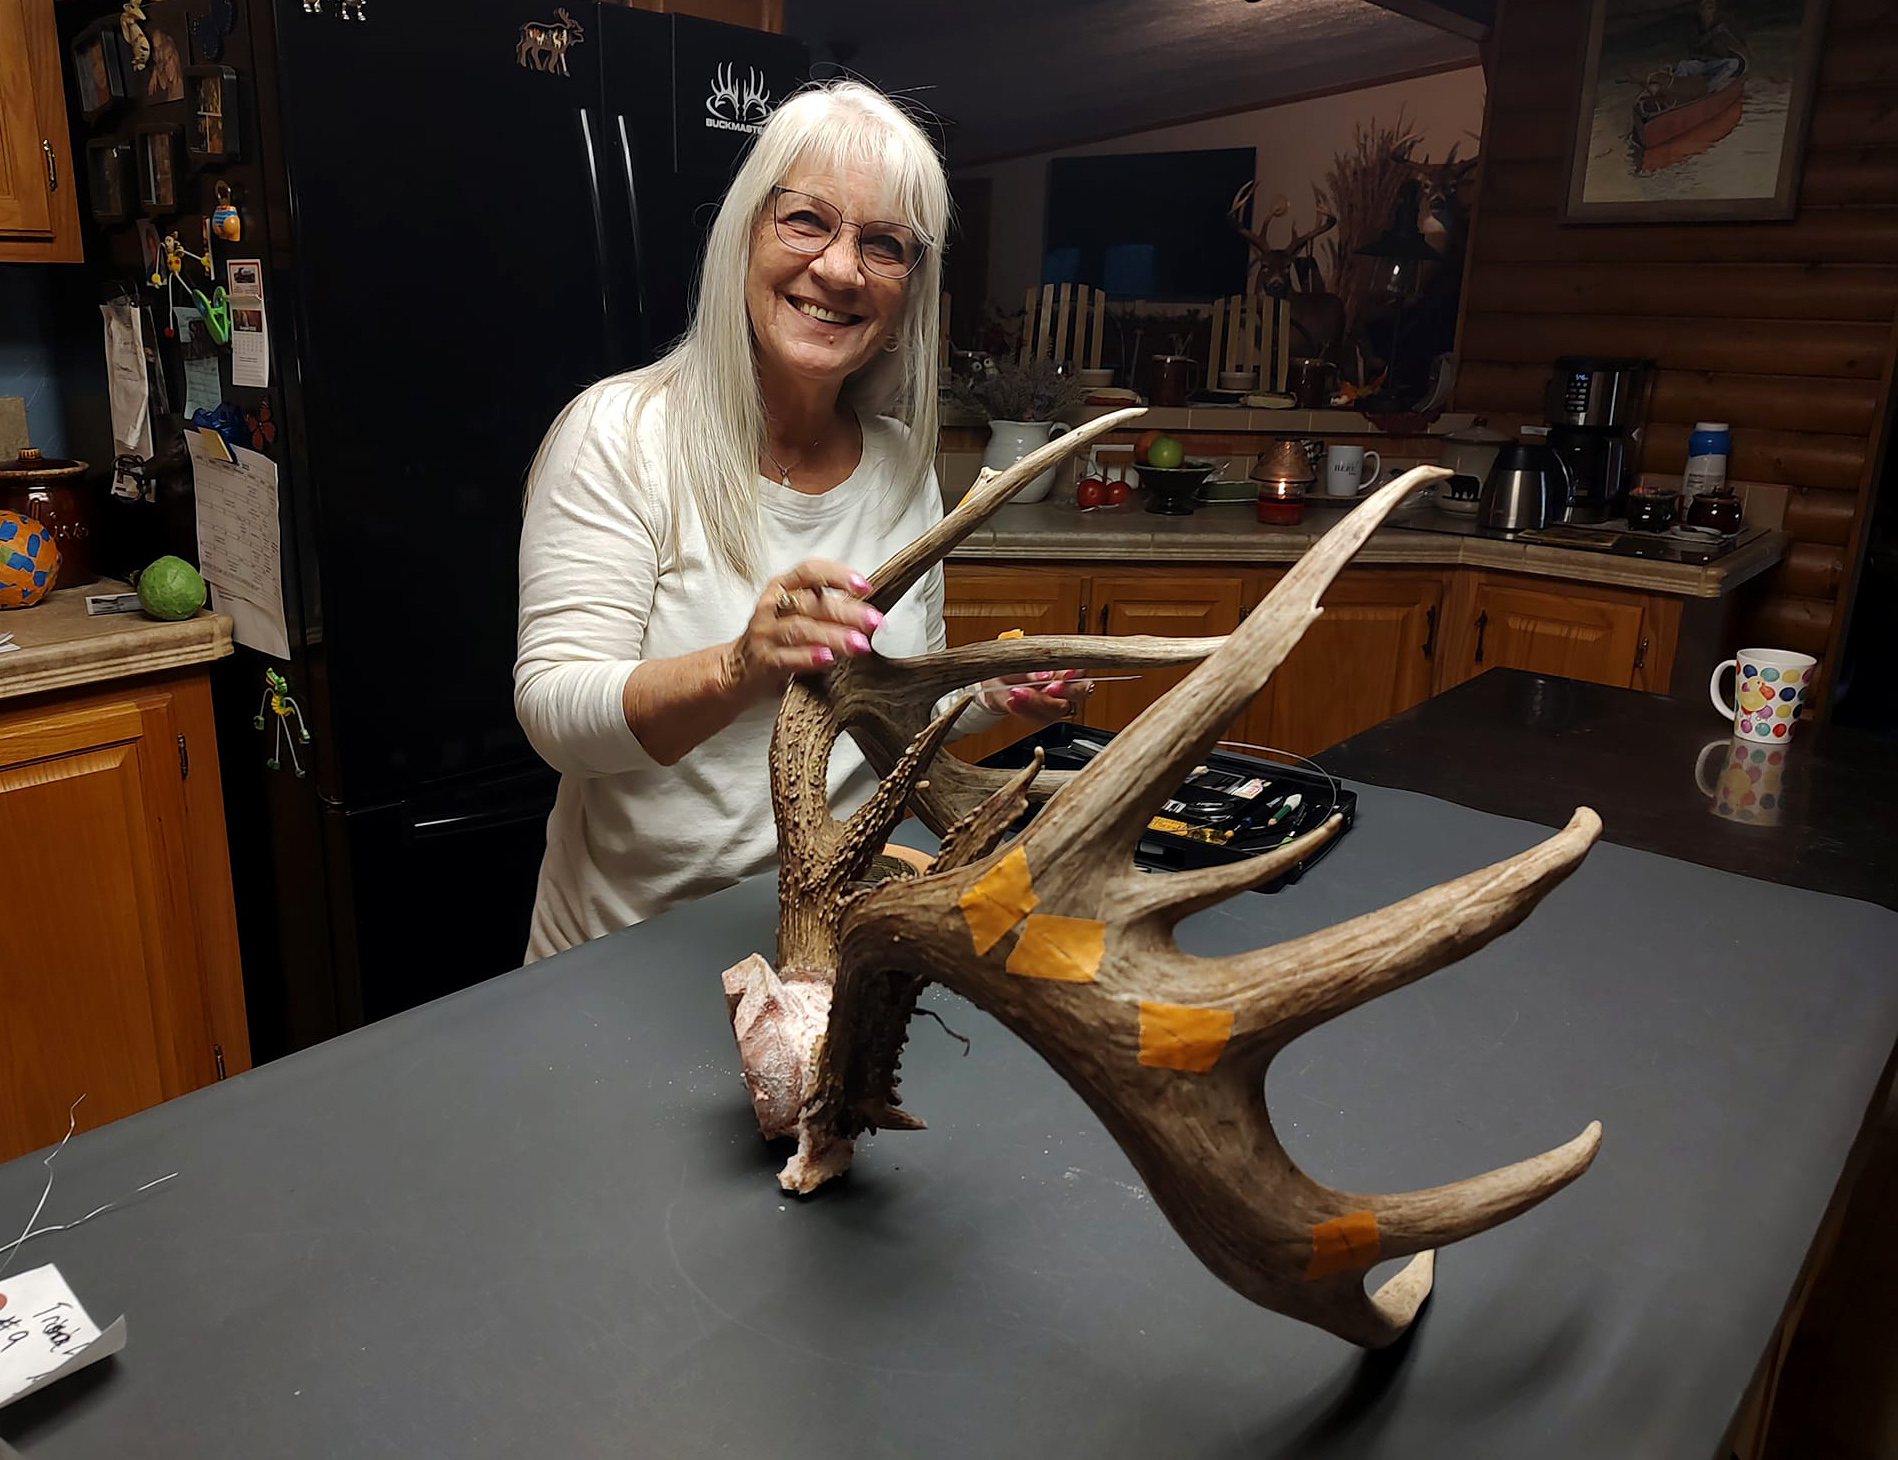 A woman scores a big set of whitetail antlers on a kitchen table.